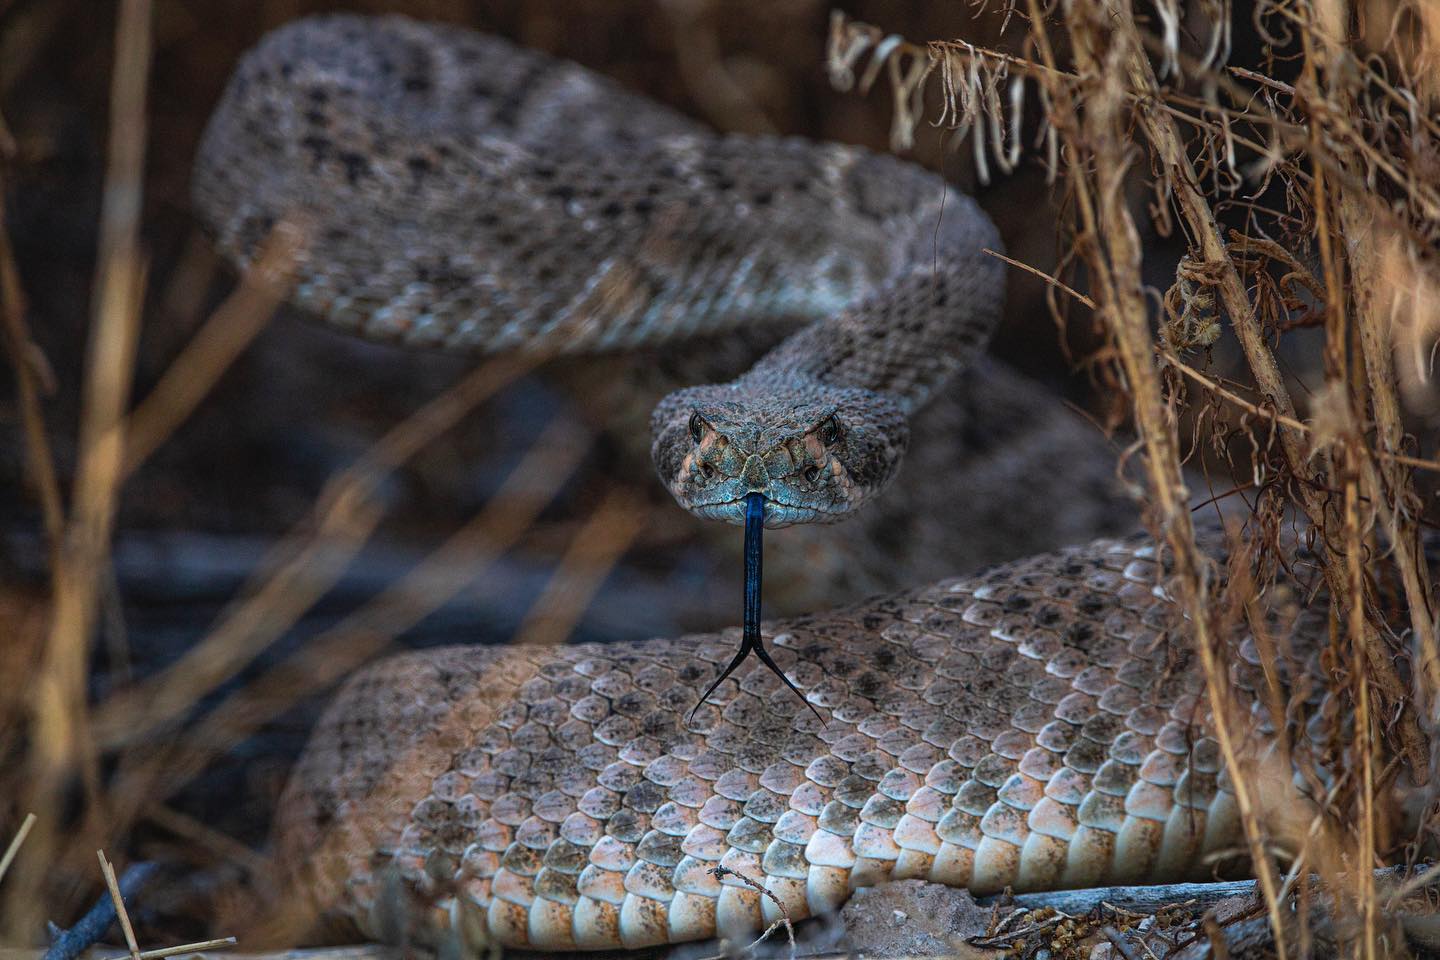 A western diamondback rattlesnake in the wild, facing the camera with tongue out